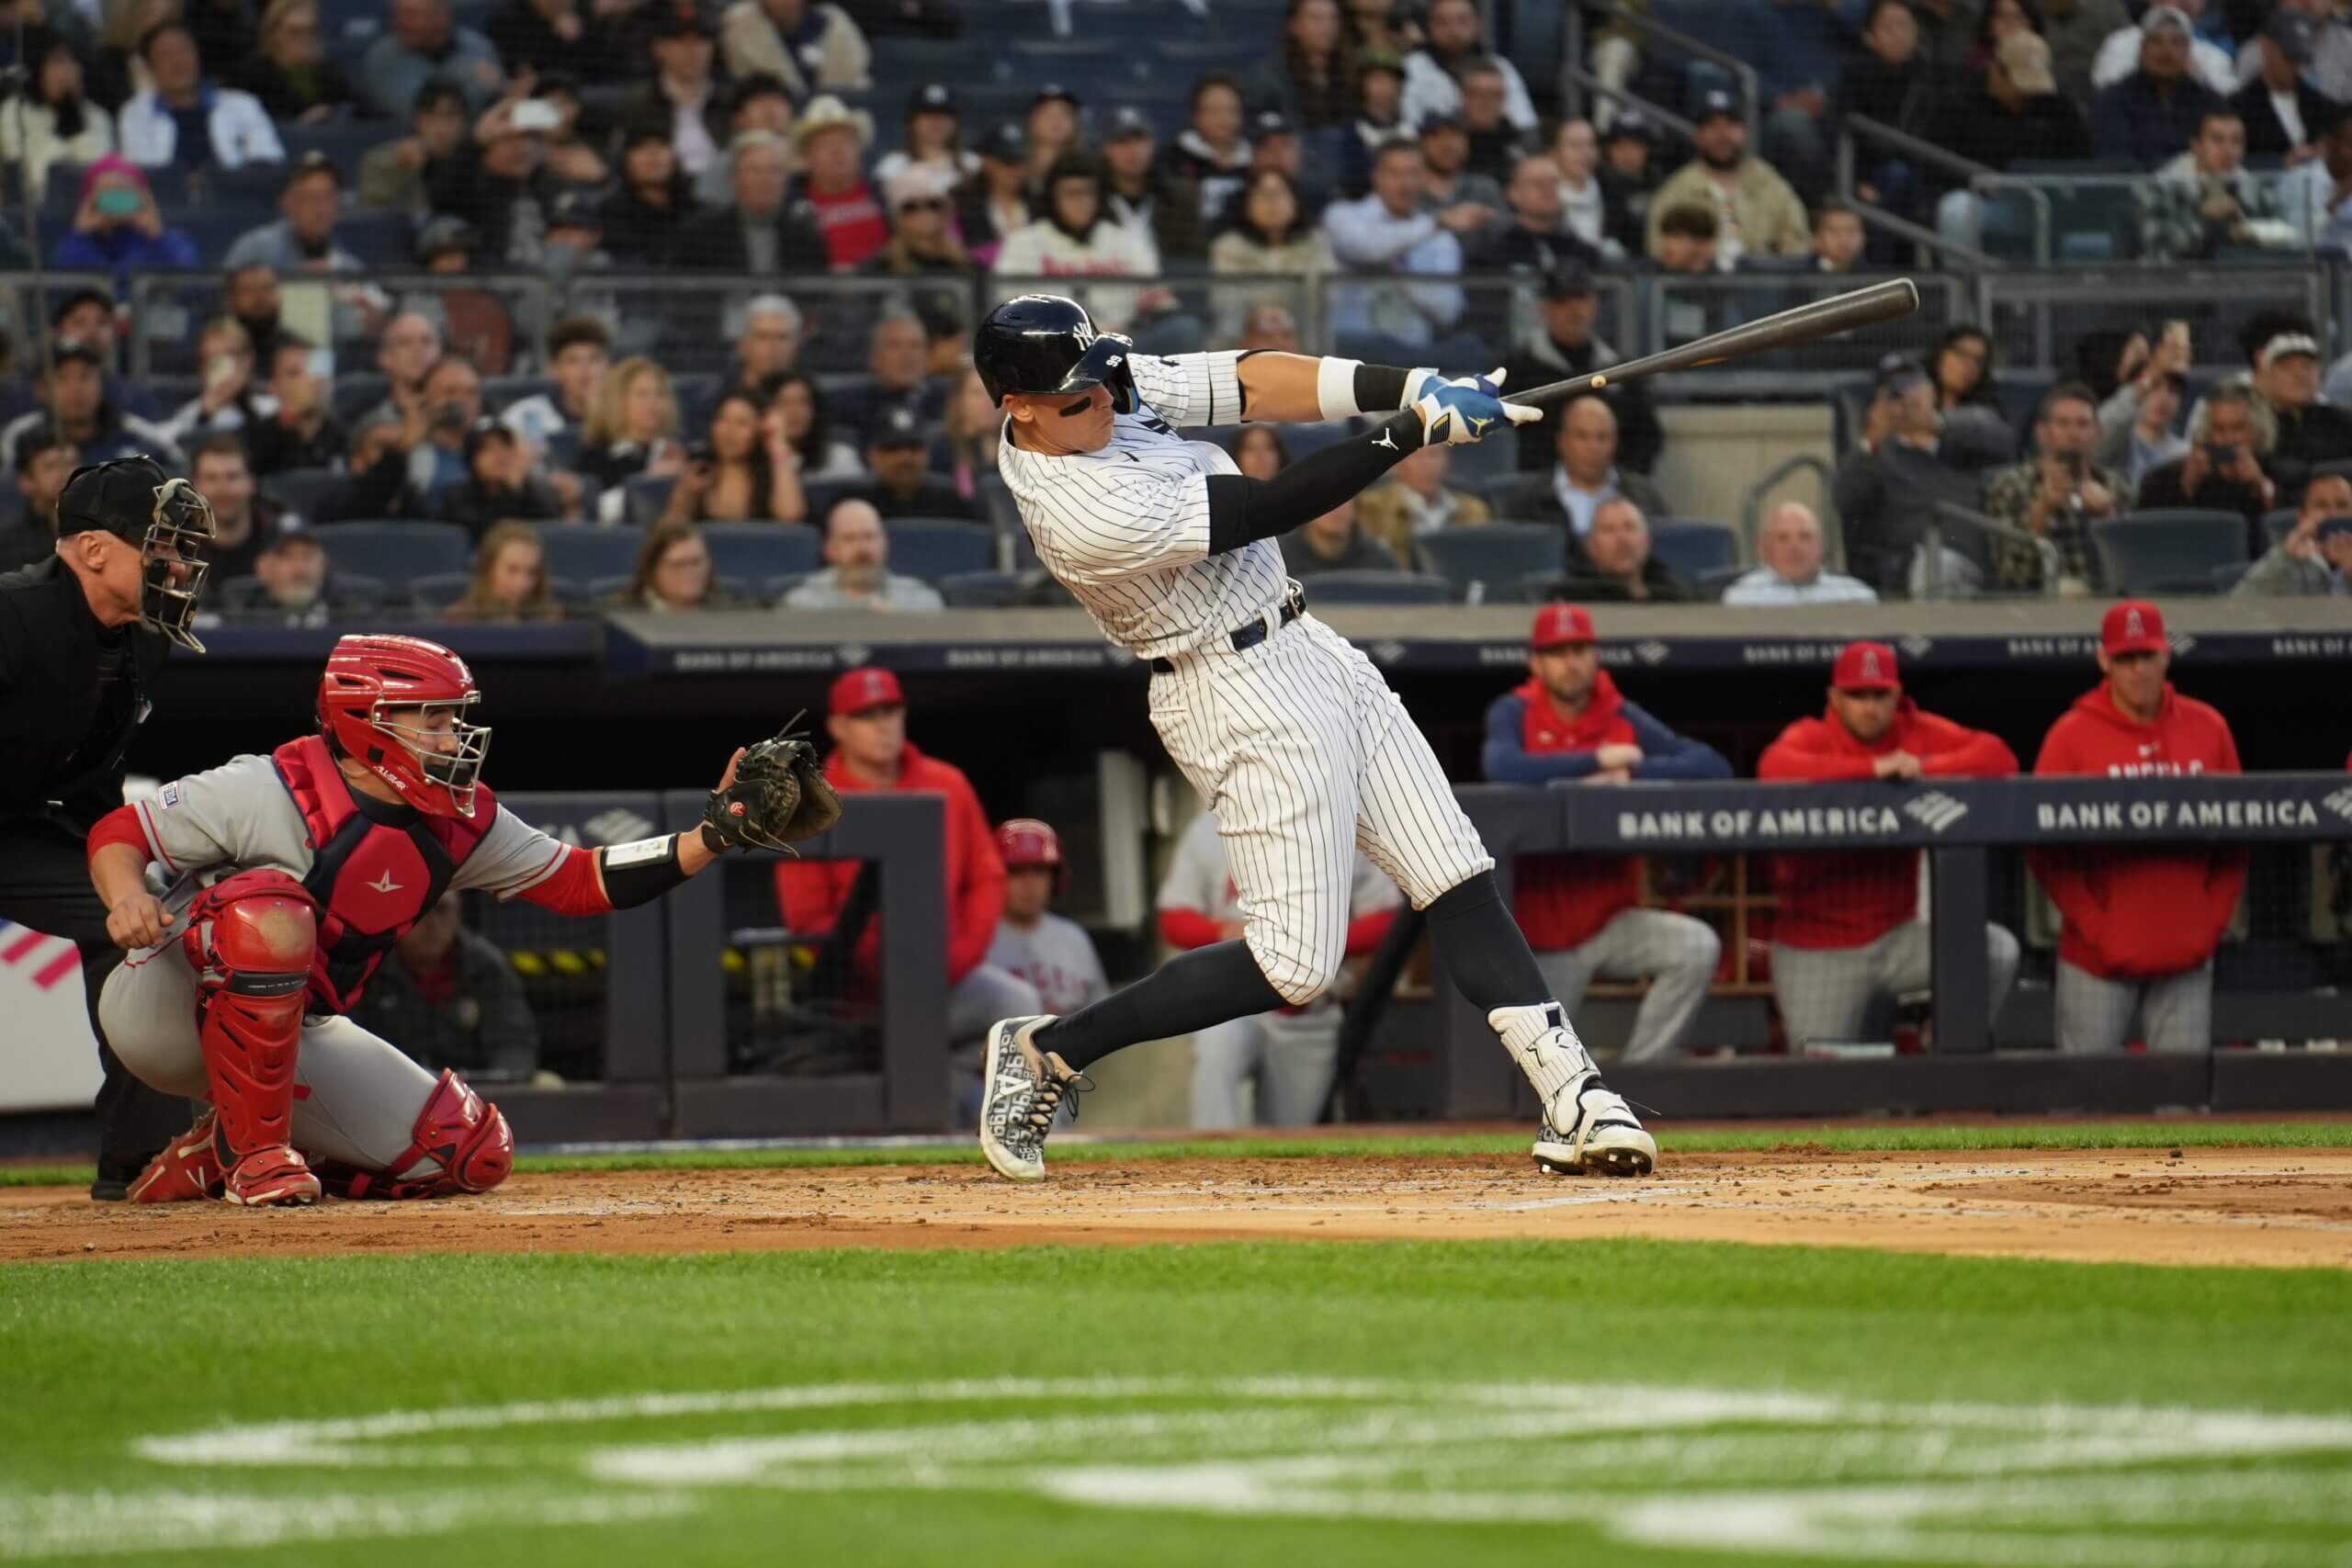 Yankees slugger Judge expected back Tuesday from hip injury - The